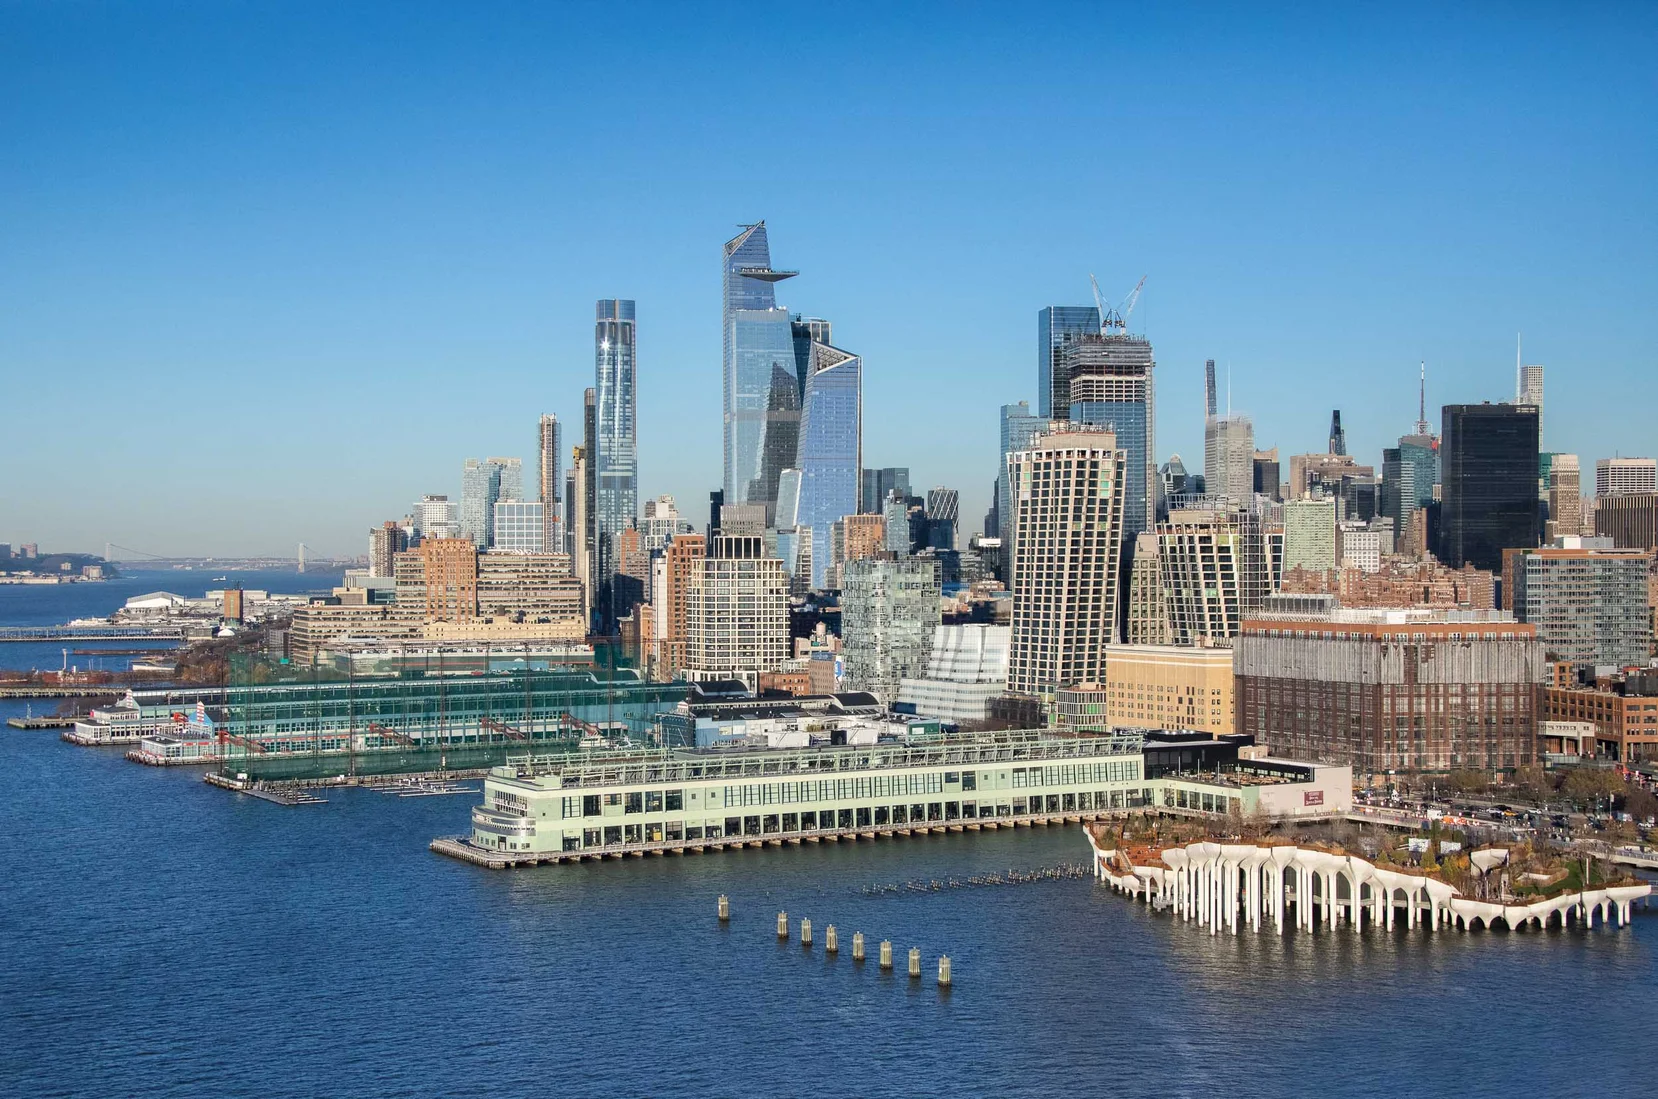 Waterfront shot against downtown Manhattan skyline of Google’s new Pier 57 office in New York, with a public food hall and community spaces opening in 2022.